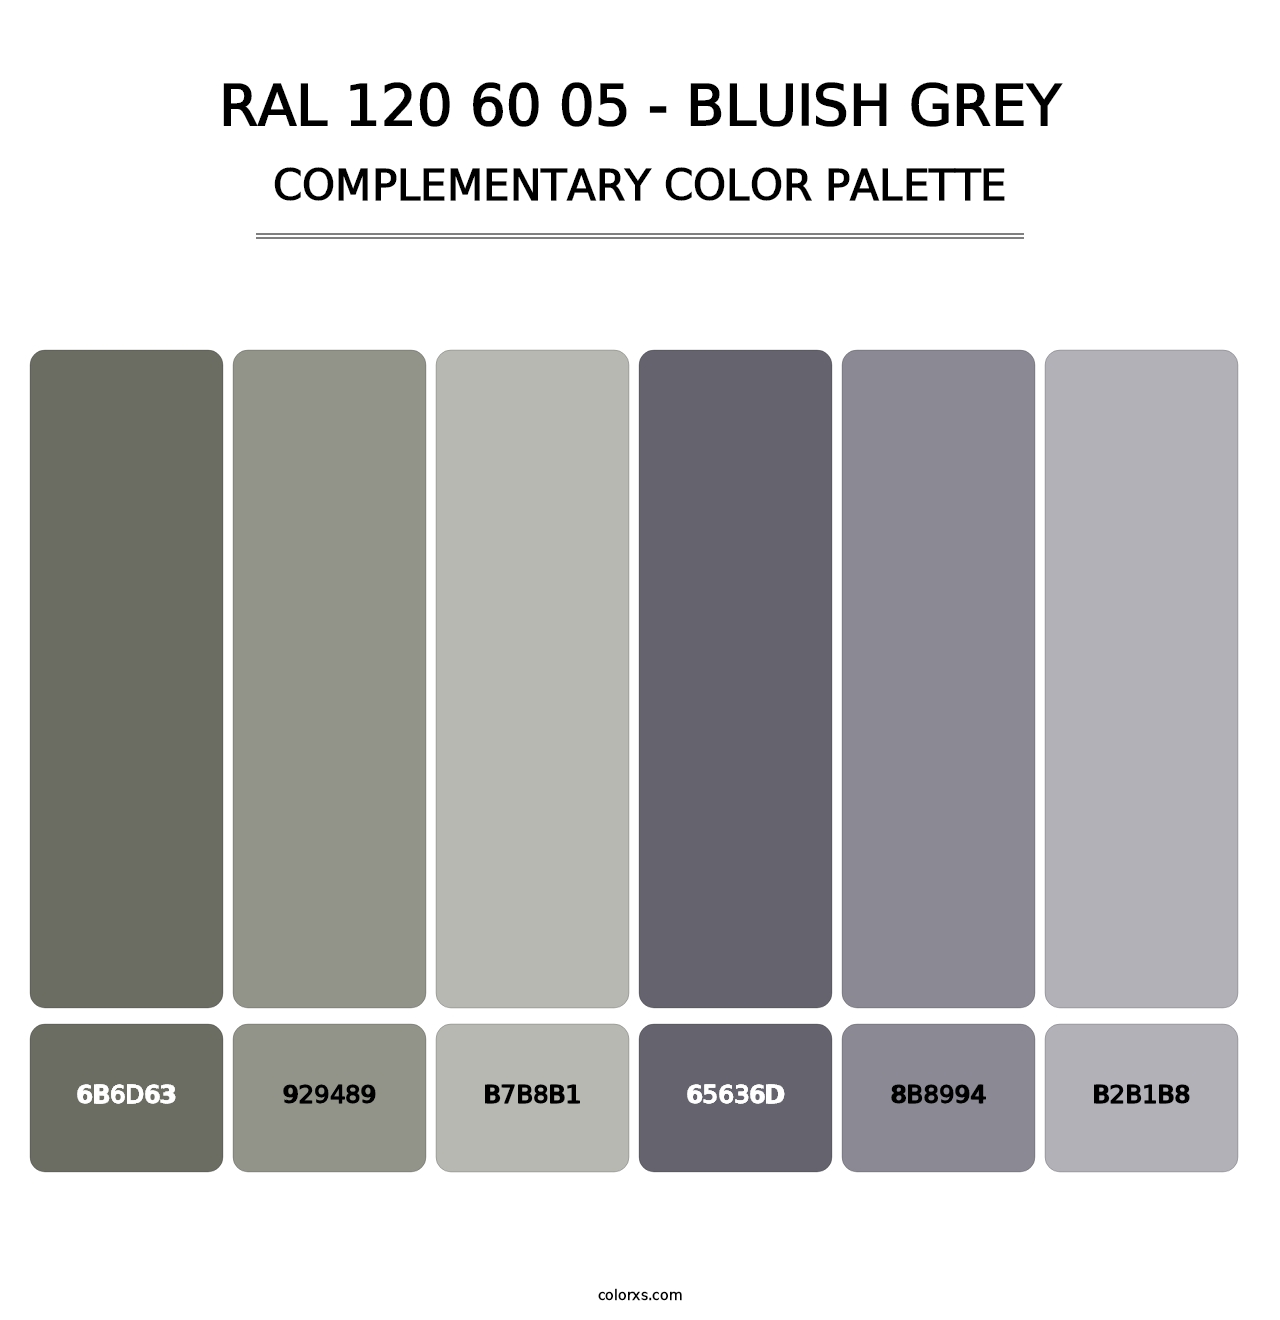 RAL 120 60 05 - Bluish Grey - Complementary Color Palette